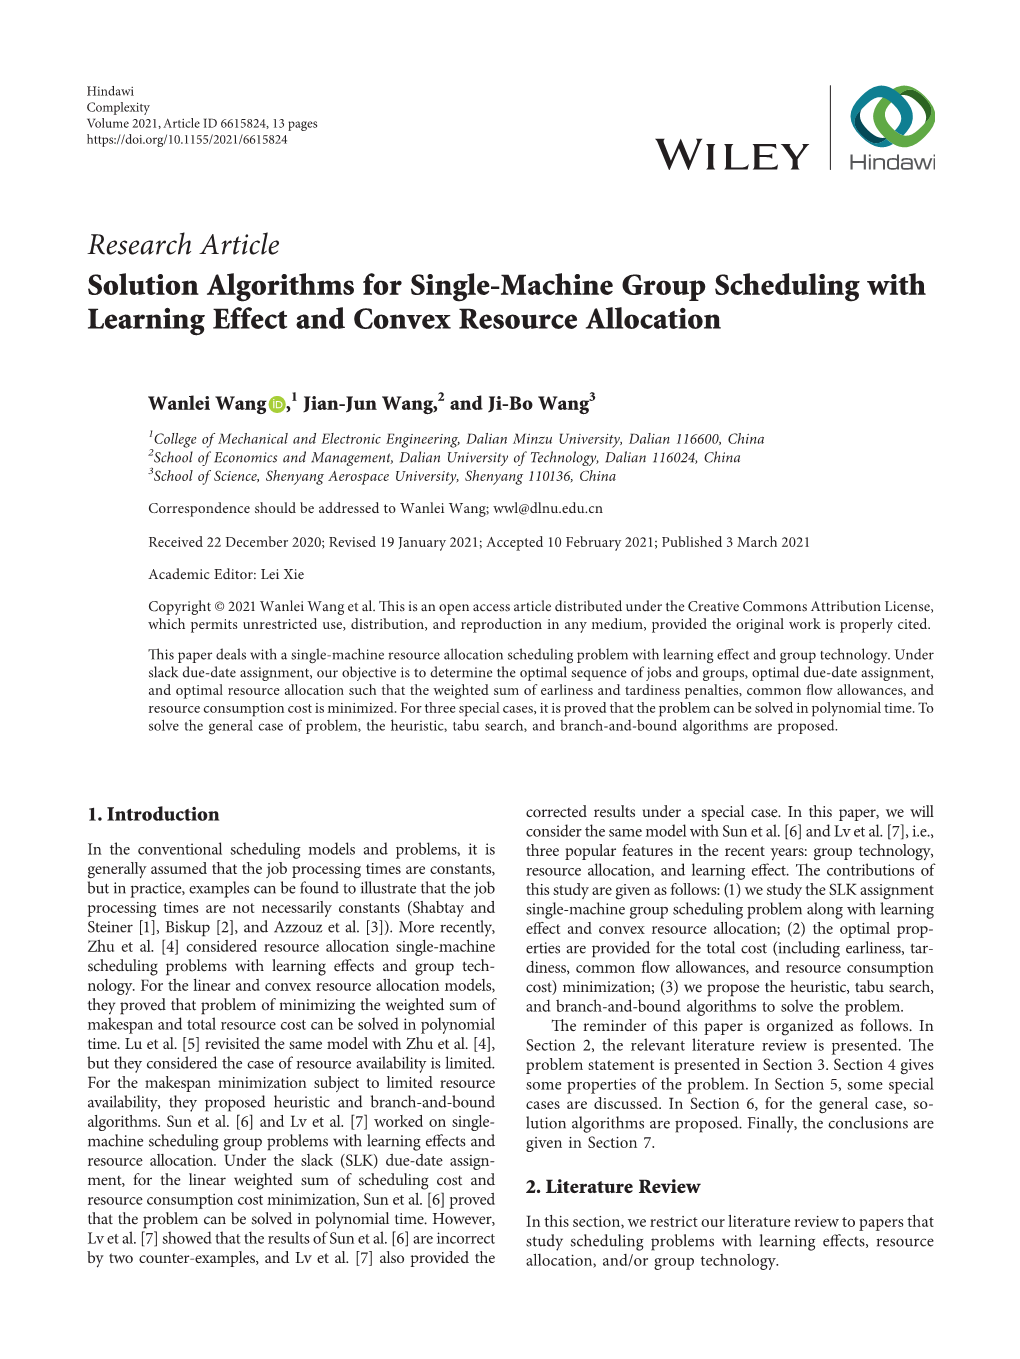 Solution Algorithms for Single-Machine Group Scheduling with Learning Effect and Convex Resource Allocation